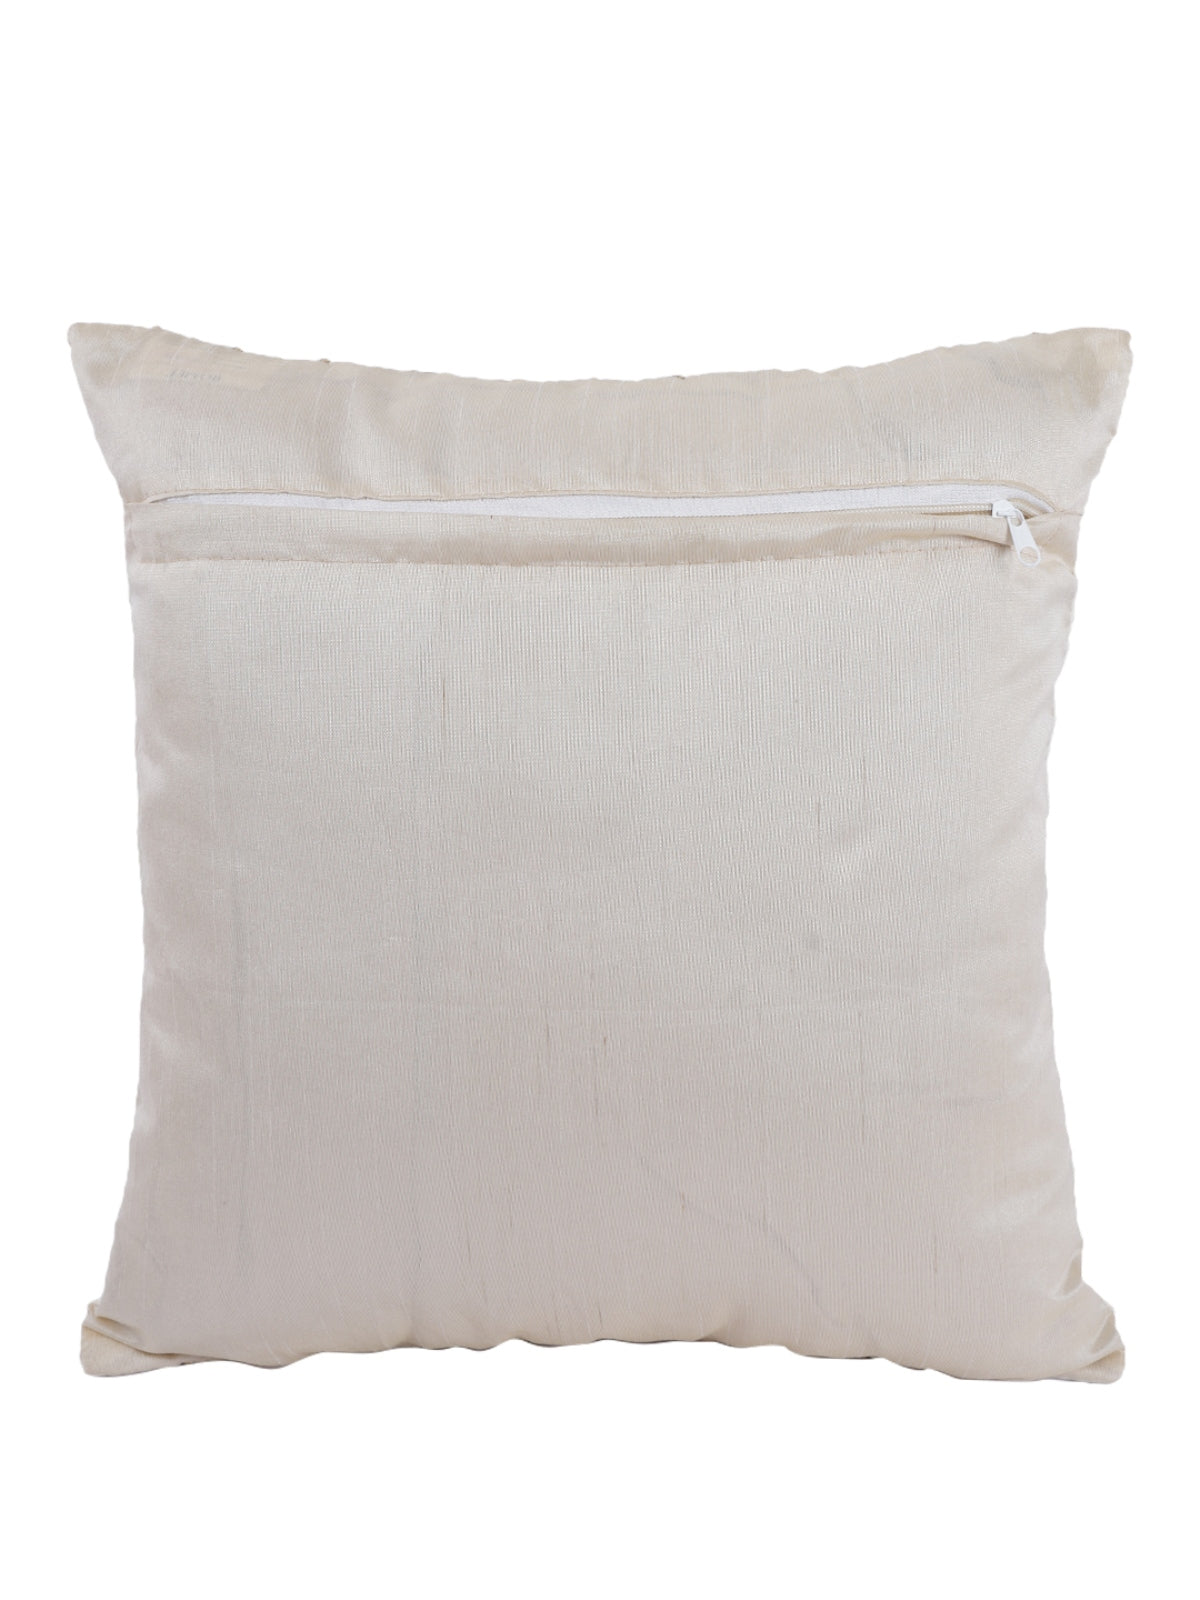 White & Beige Set of 5 Polyester 16 Inch x 16 Inch Cushion Covers